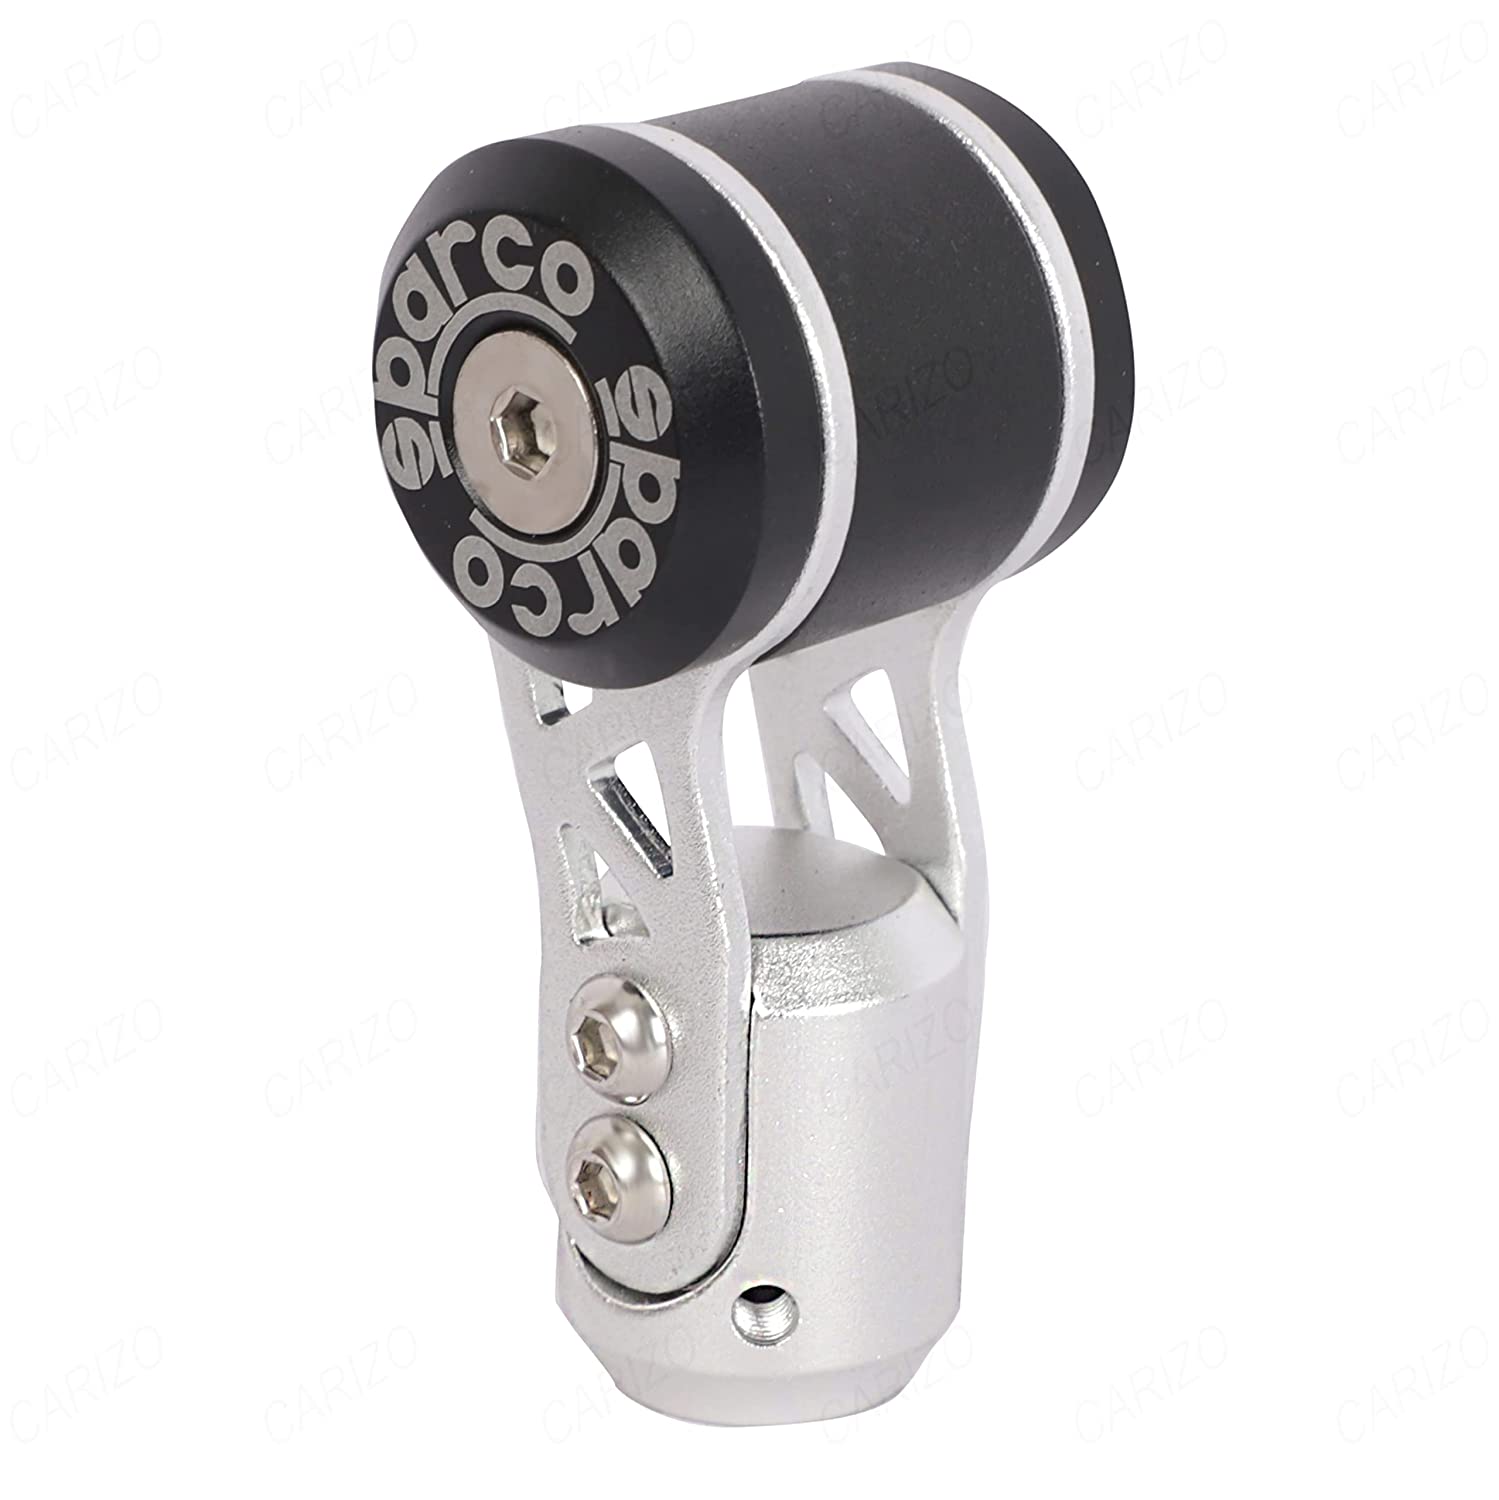 Sparco aircraft style gear knob